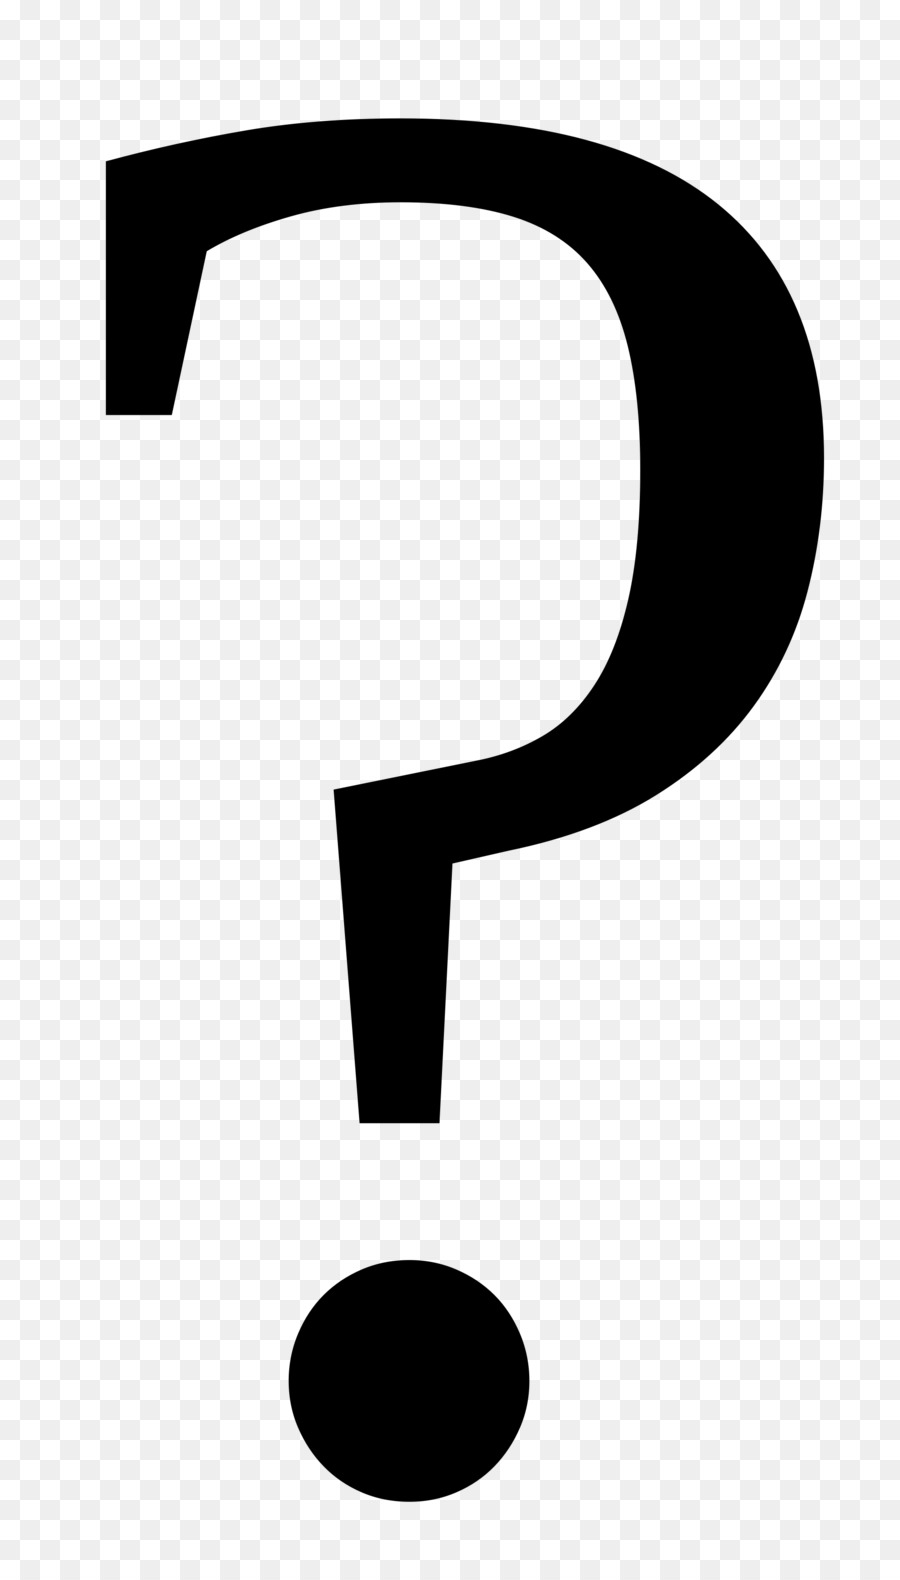 Question mark Clip art - others png download - 1920*3360 - Free Transparent Question Mark png Download.